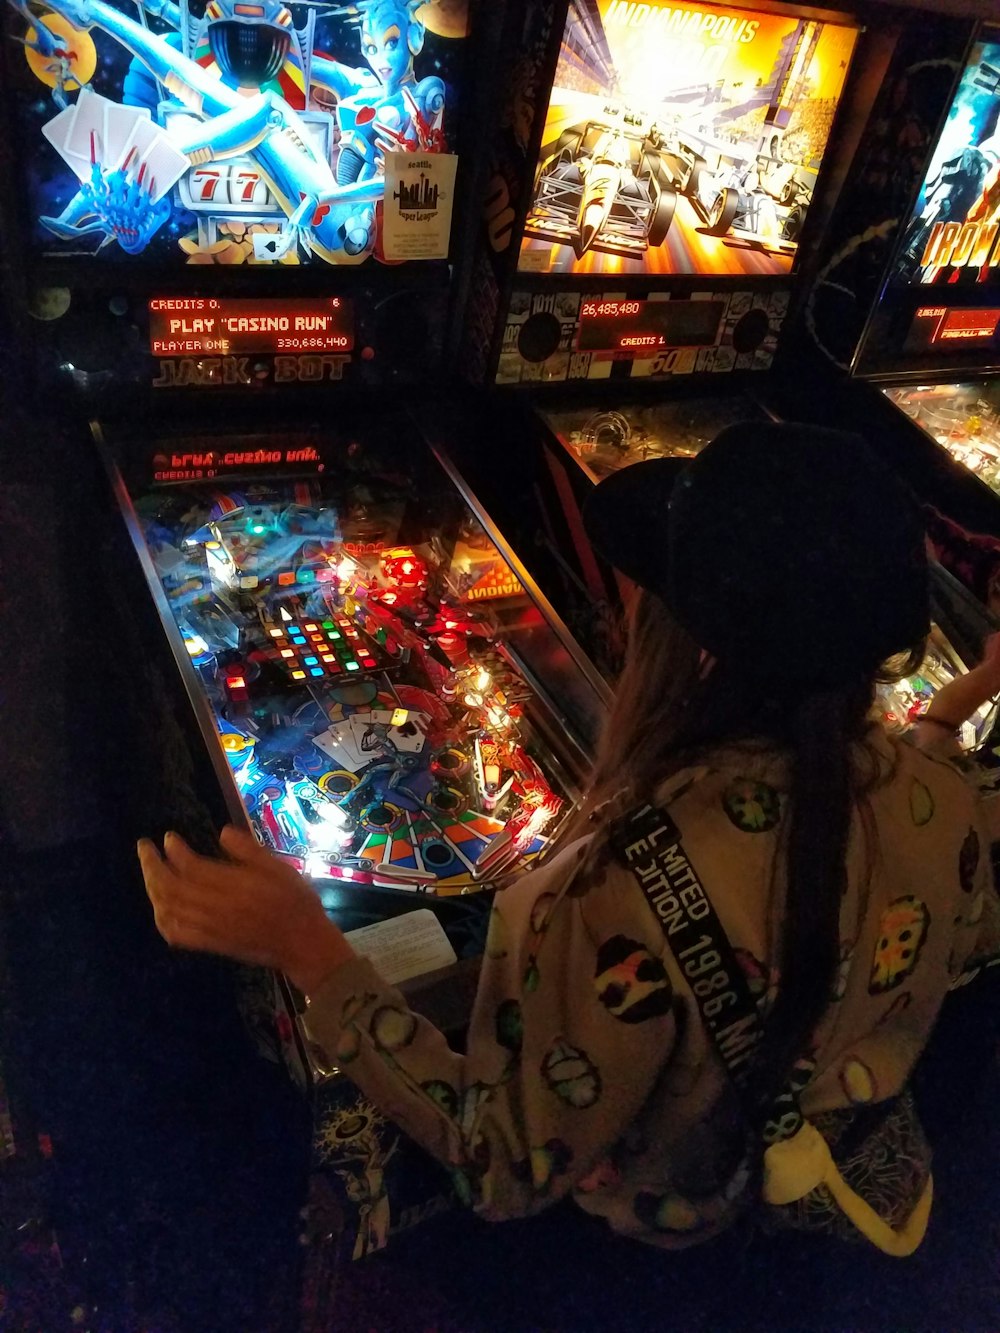 a person playing a game of pinball